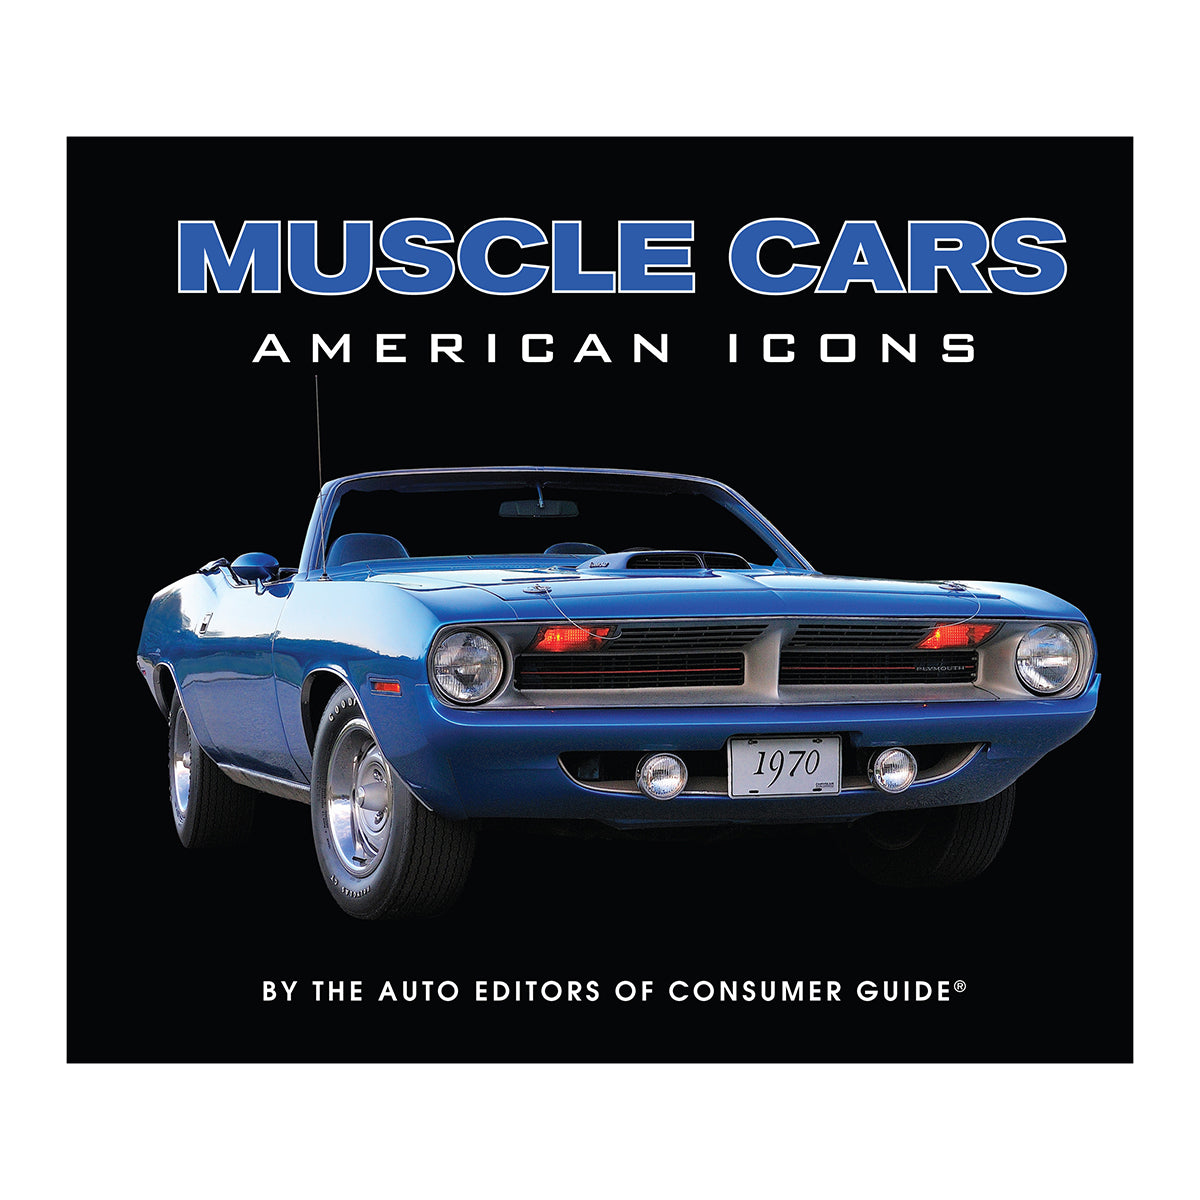 Muscle Cars: American Icons